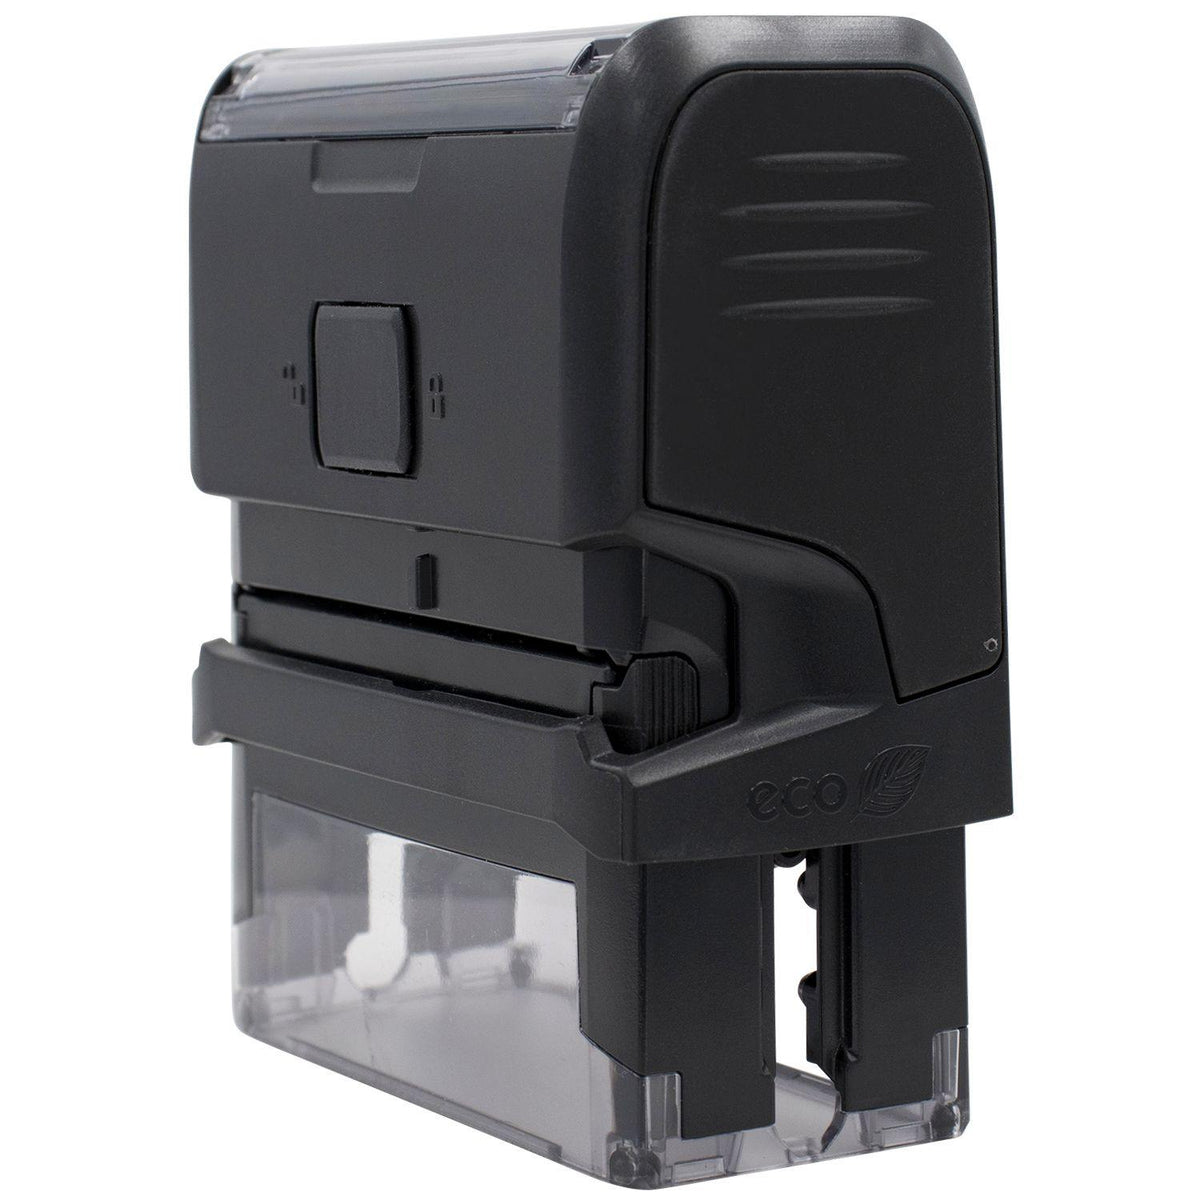 Side View of Large Self-Inking Bold Font File Stamp at an Angle